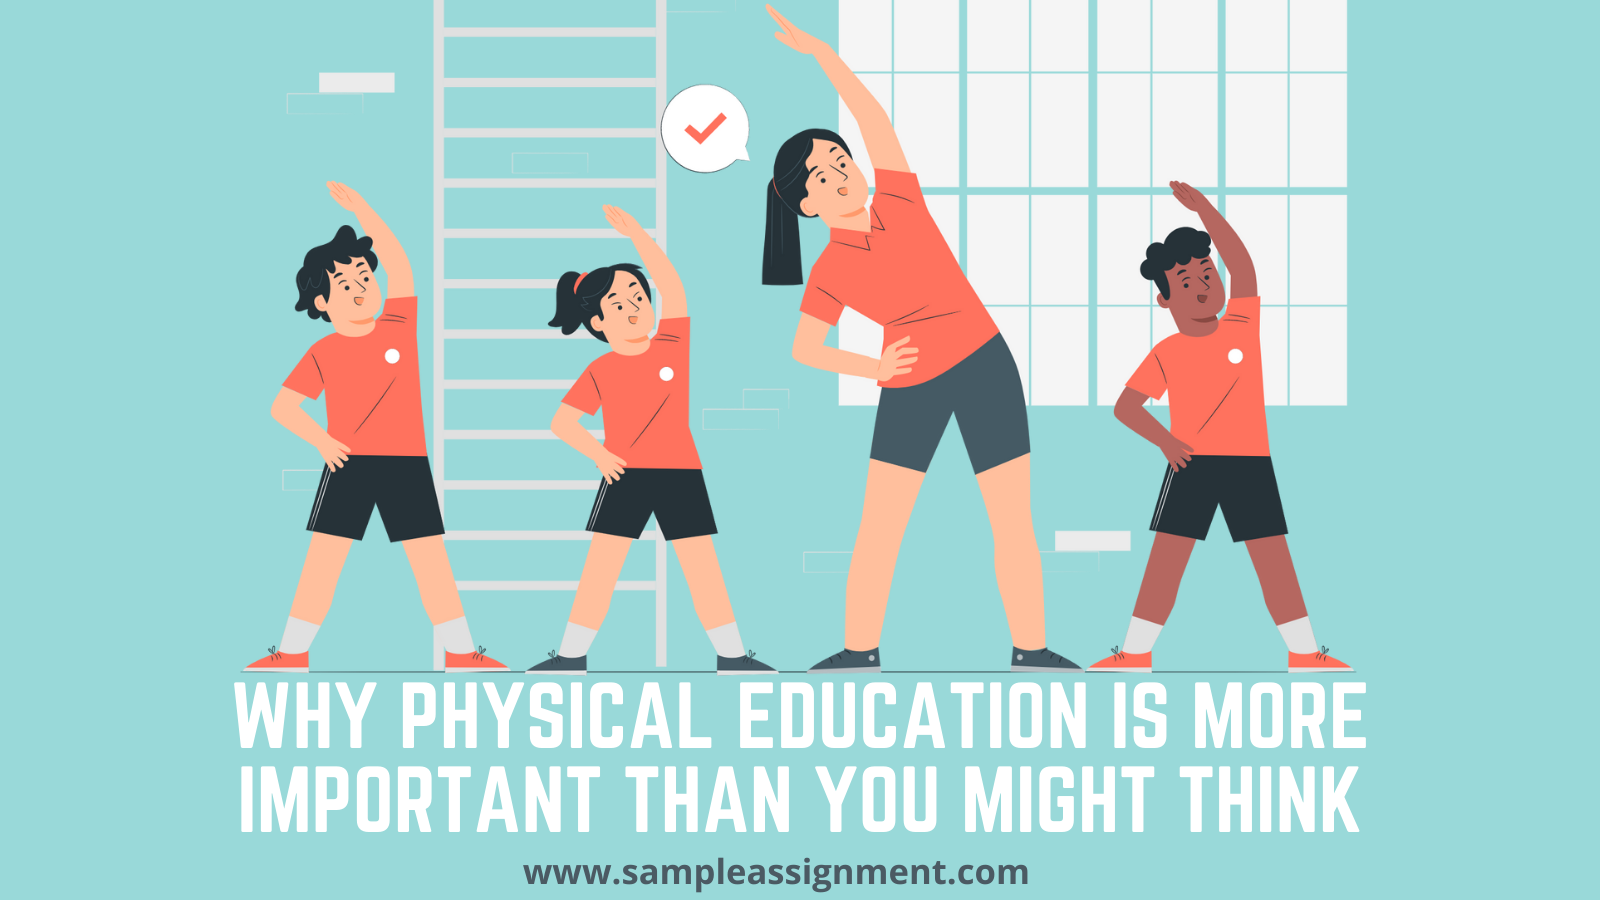 Why is Physical Education Important?